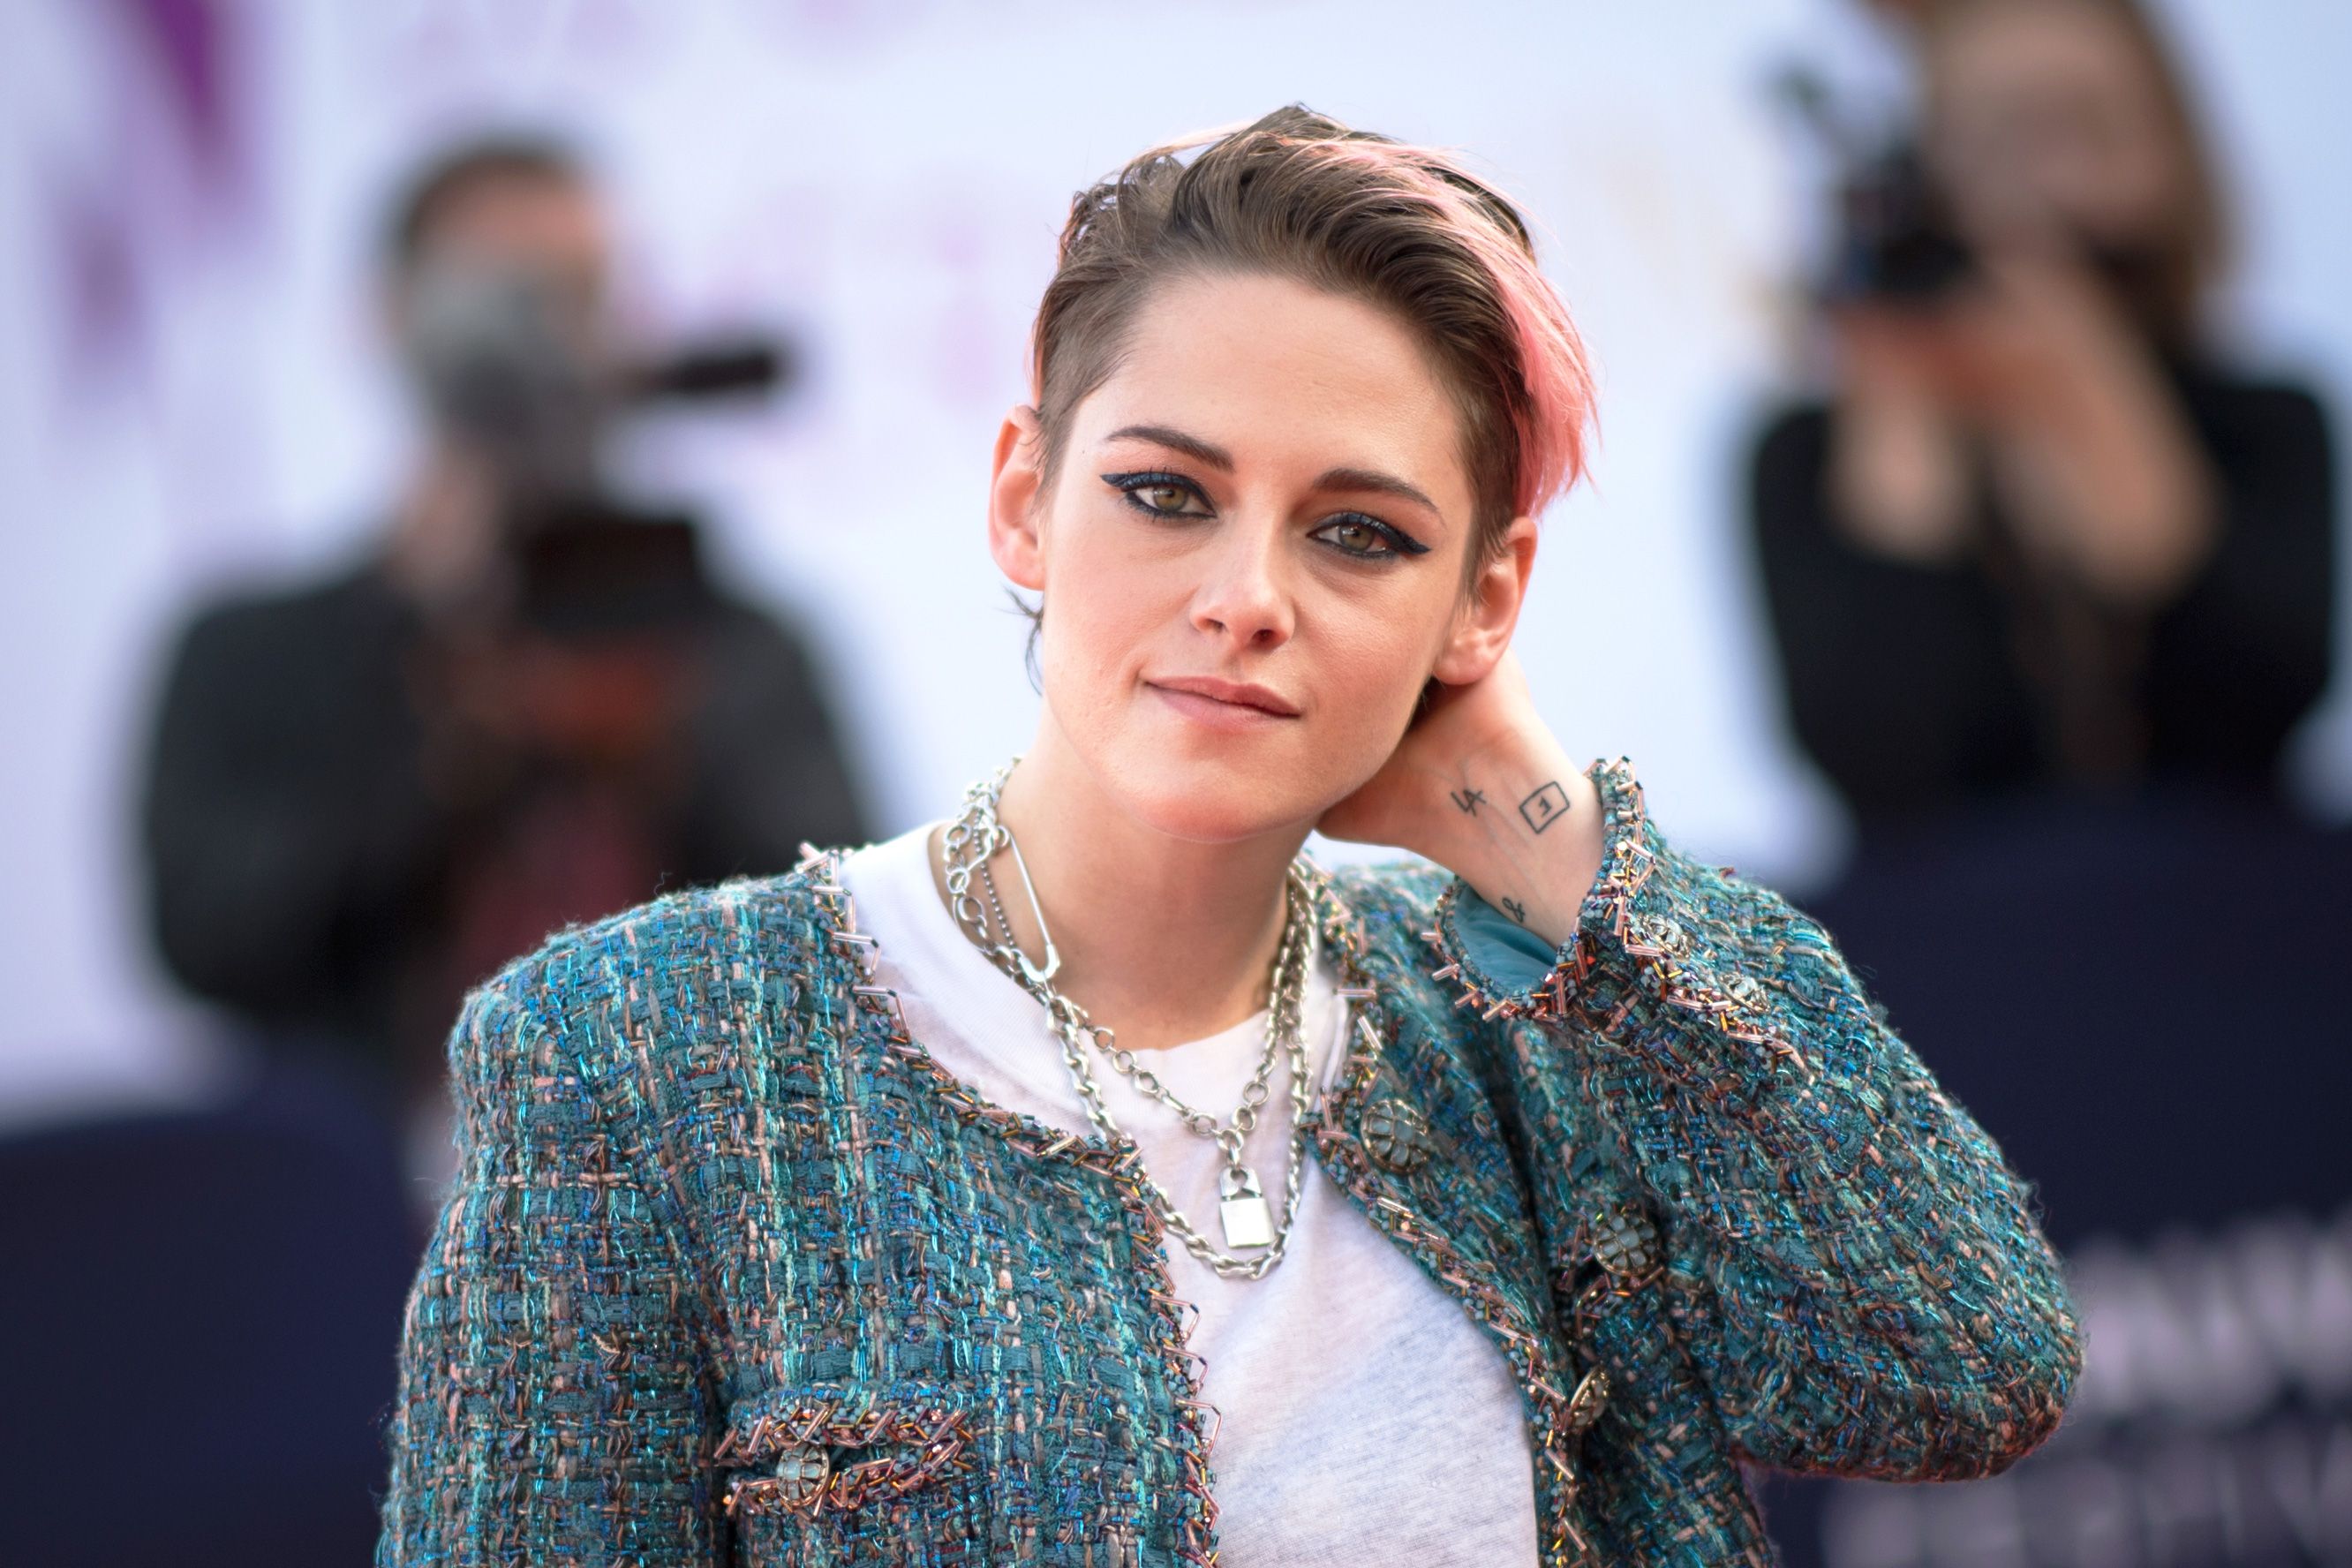 Kristen Stewart Dressed Up Her Shorts with Chanel on the Red Carpet